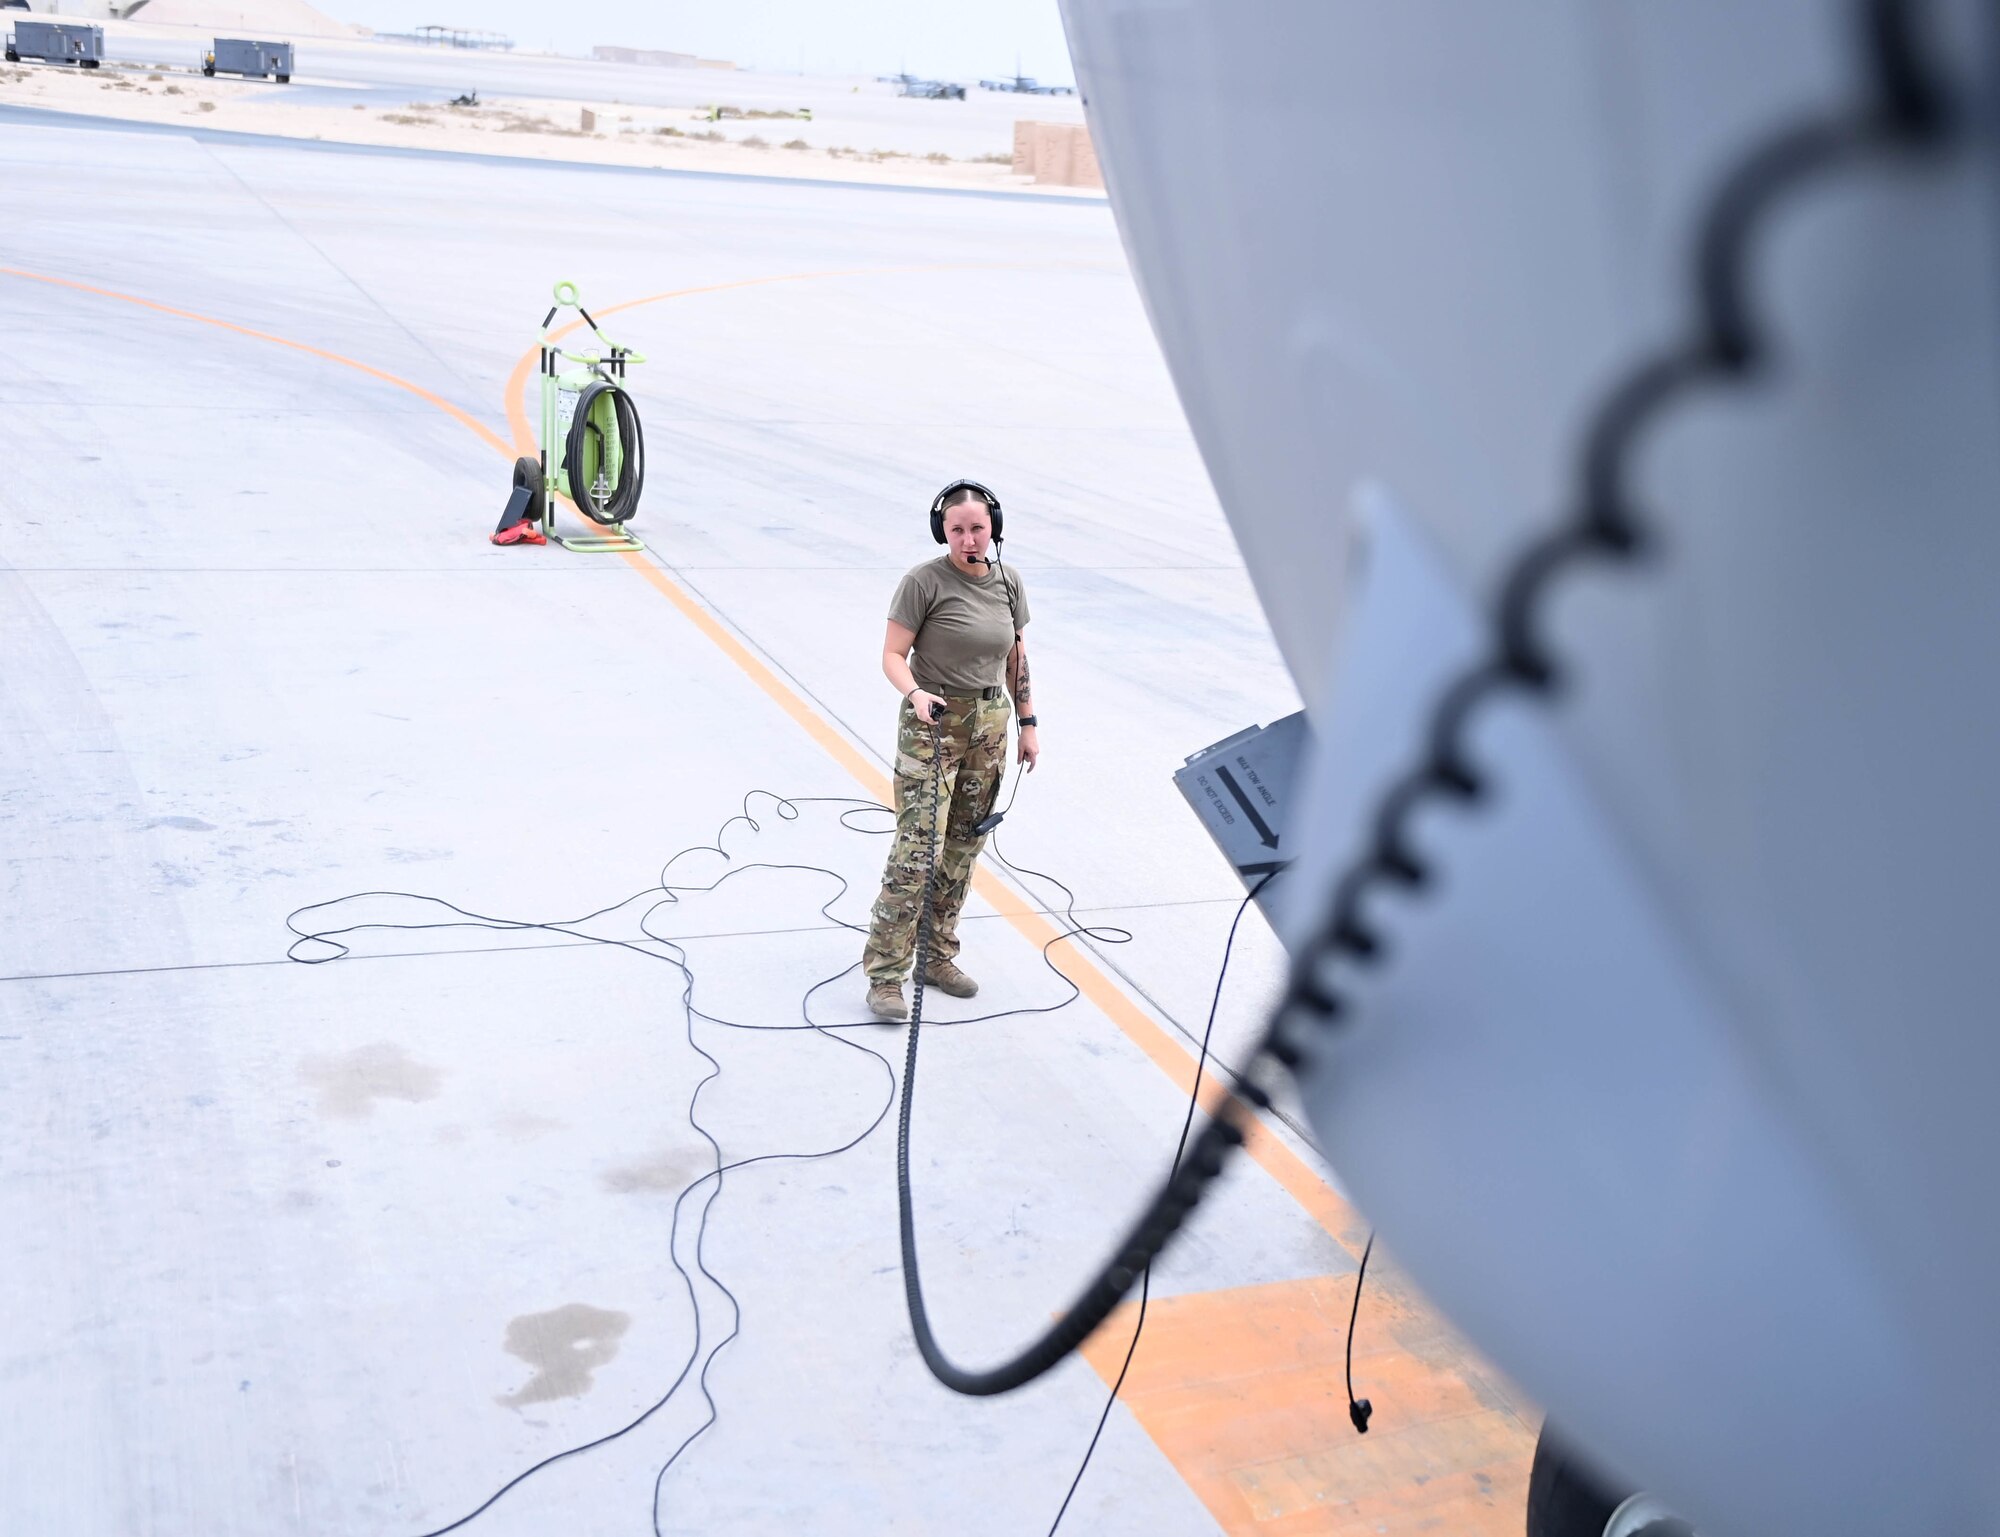 U.S. Air Force Airman 1st Class Mikaela Branchfield, an 816th Expeditionary Airlift Squadron loadmaster, conducts a preflight test by a C-17 Globemaster, July 12, 2022 at Al Udeid Air Base, Qatar. C-17 aircraft provide the strategic capability of transporting mission materials and personnel. (U.S. Air National Guard photo by Tech. Sgt. Michael J. Kelly)